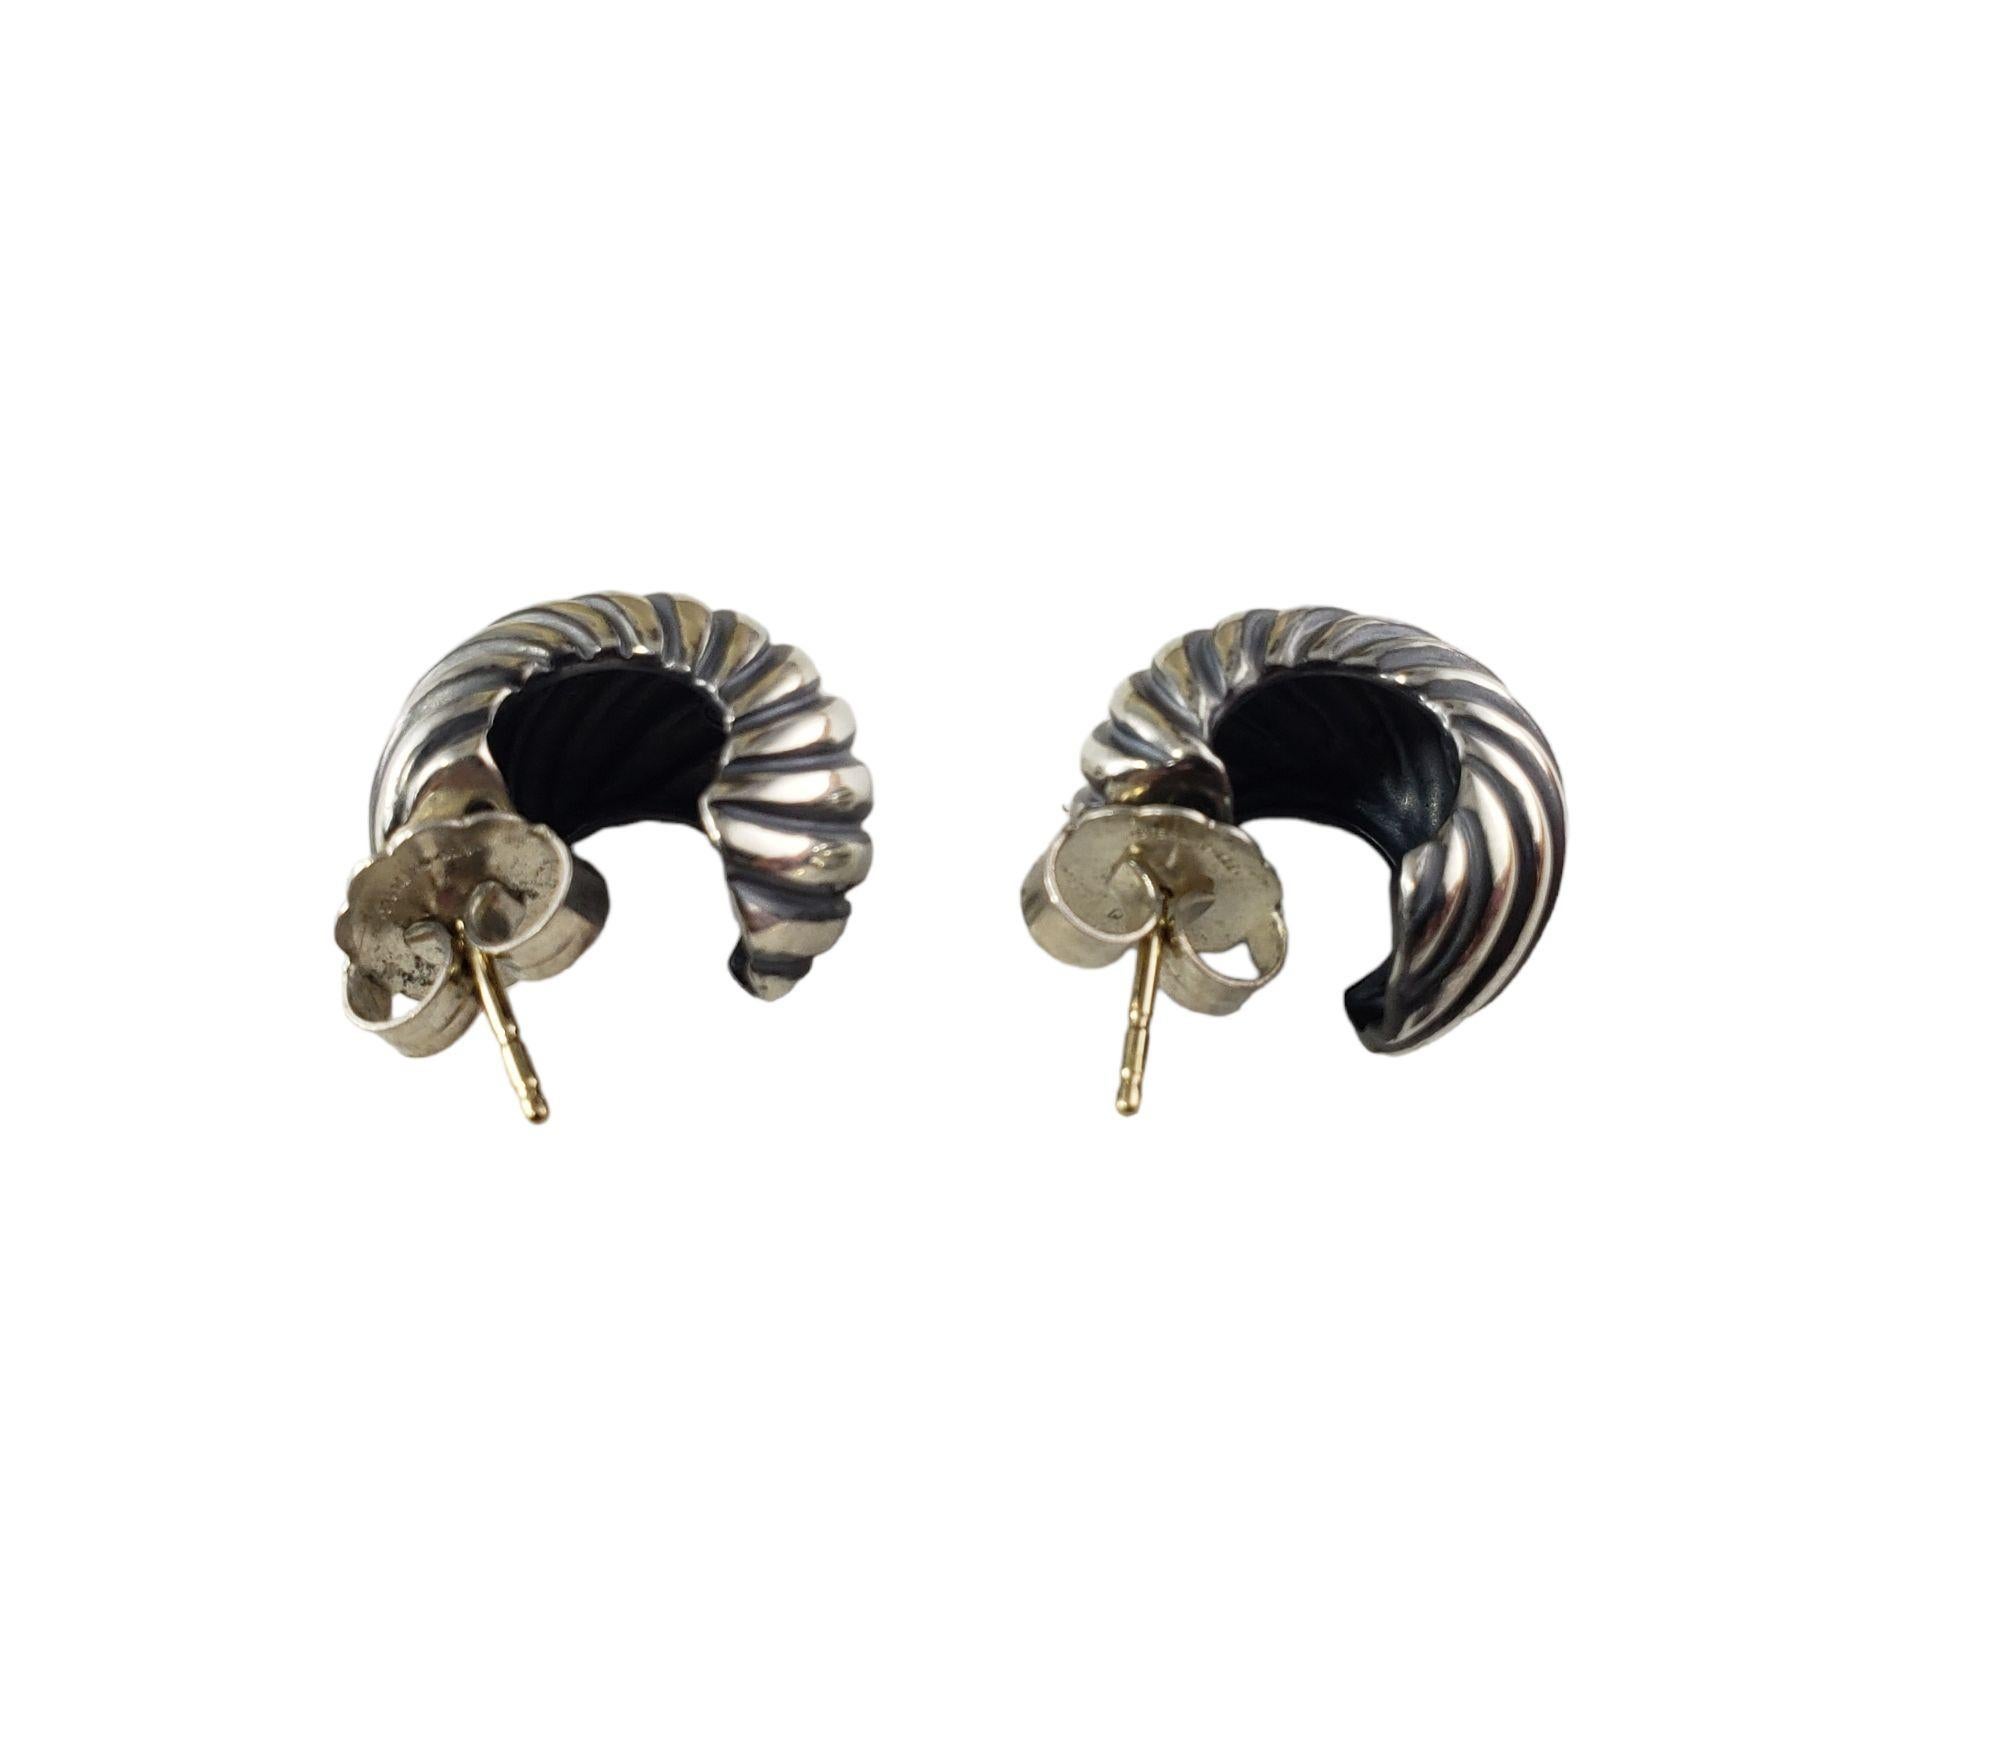 Vintage David Yurman Sterling Silver Earrings-

These elegant David Yurman cable earrings are crafted in meticulously detailed sterling silver.

Size: 20 mm x 12 mm

Weight: 12.1 gr./ 7.7 dwt.

Hallmark: 925 D.Y.

Very good condition, professionally